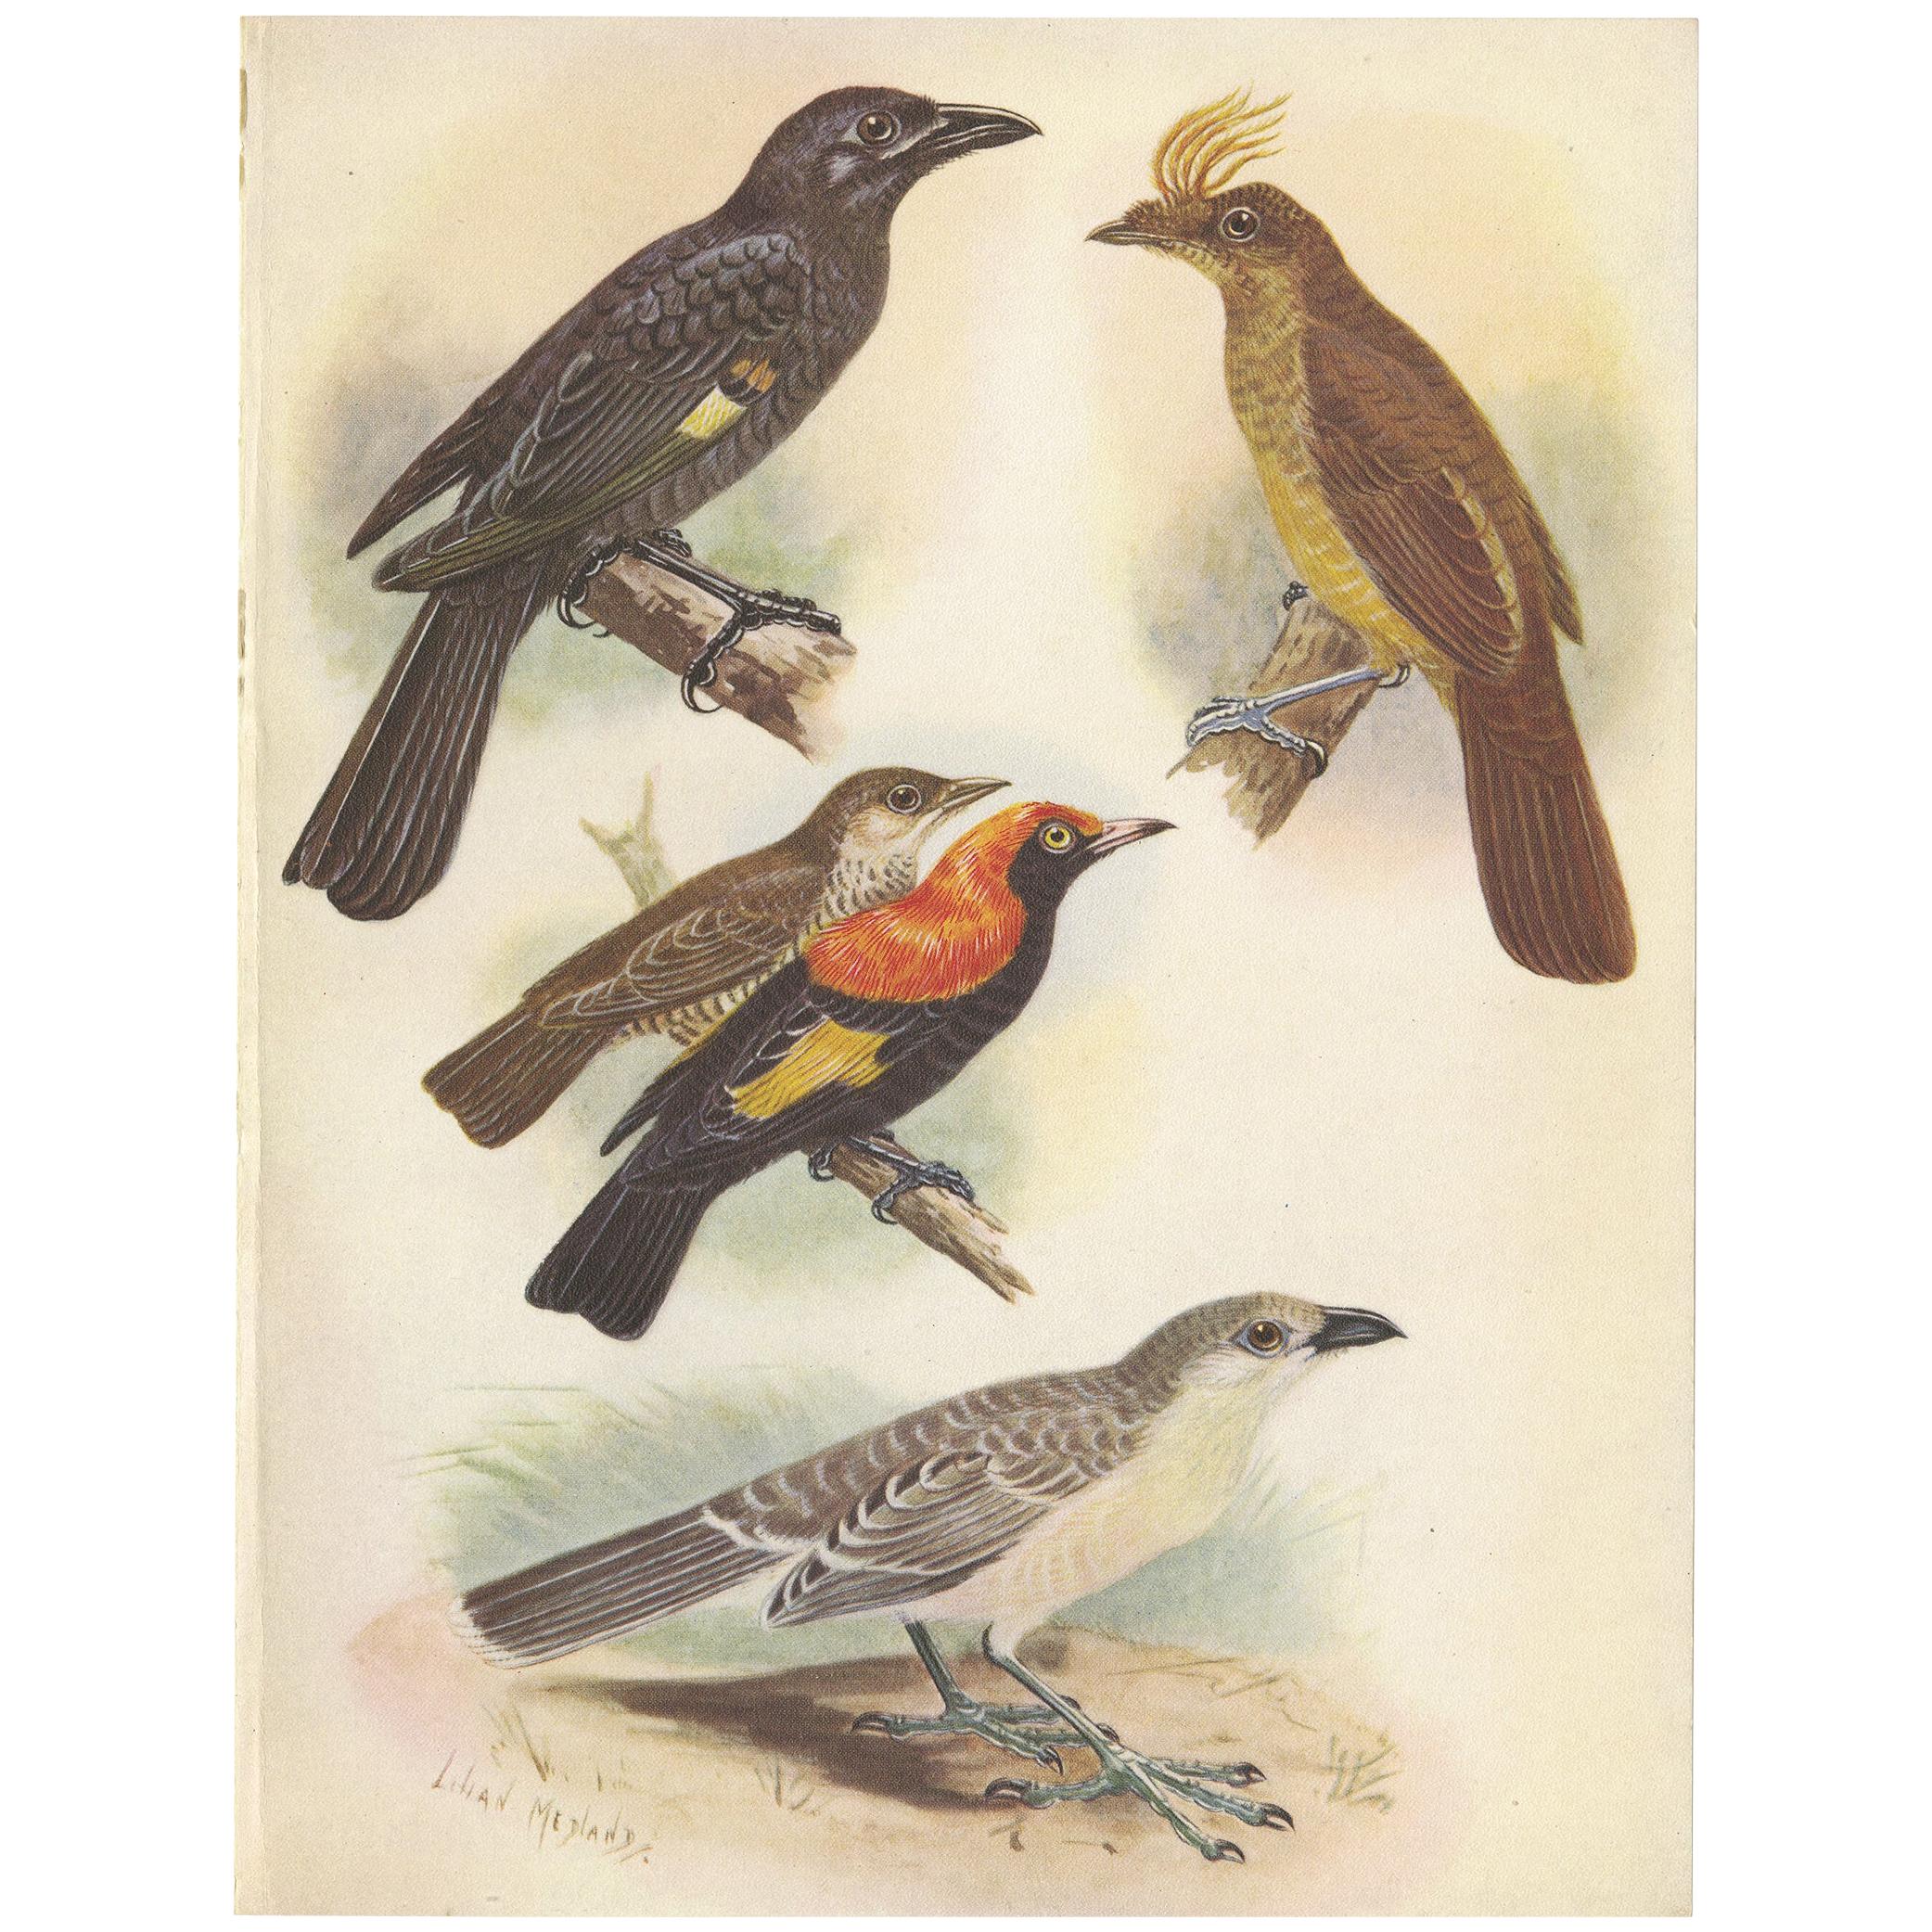 Antique Print of the Archbold's Bower-Bird, Crested Golden Bird and Other, 1950 For Sale